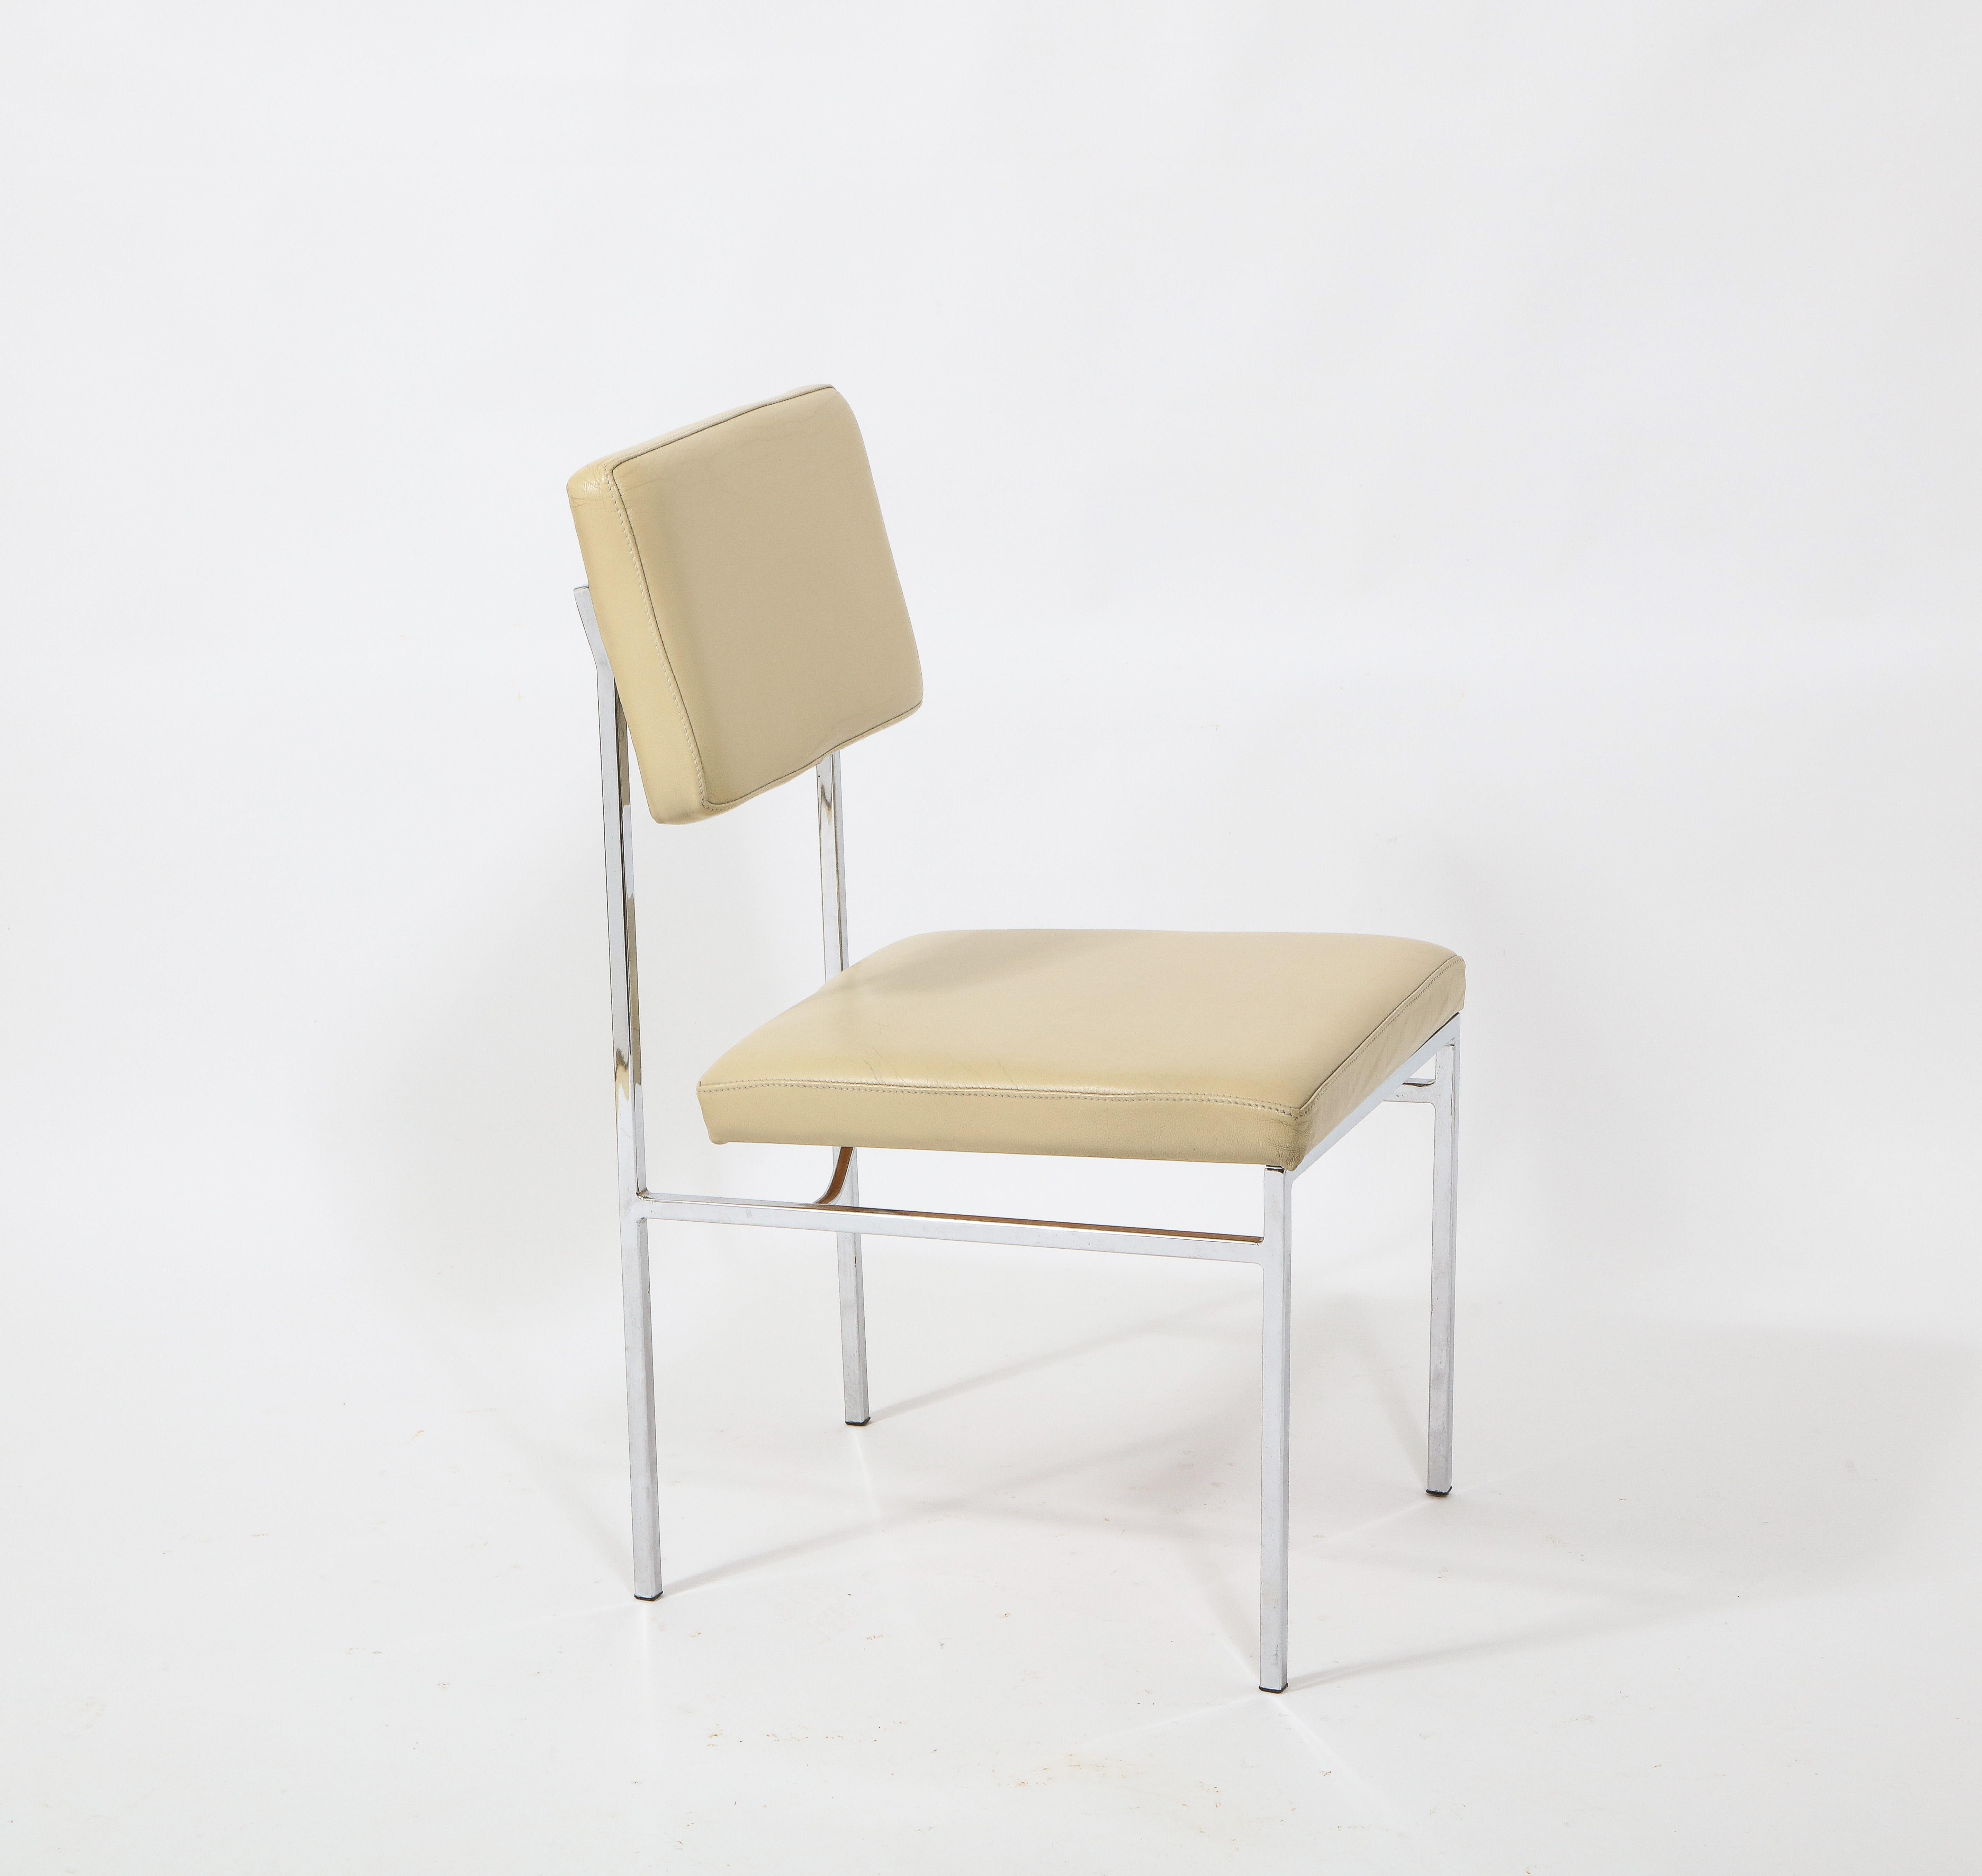 6 Chrome and Cream Leather P60 Chairs by Philippon & Lecoq, France, 1960's For Sale 8